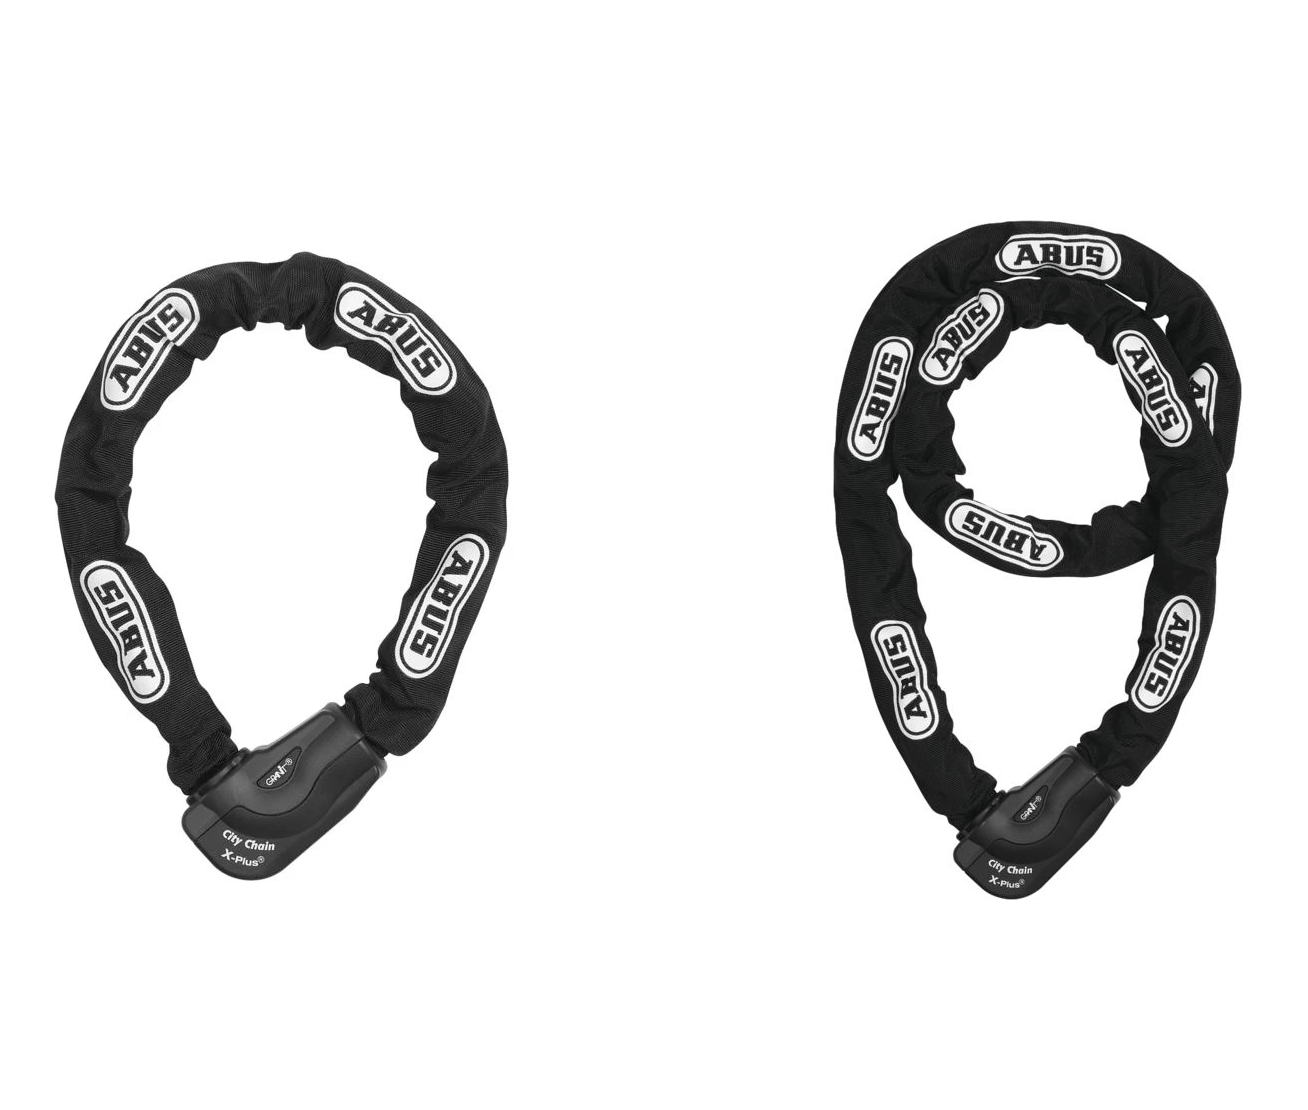 ABUS Granit City XPlus 1060 Power Cell Motorcycle Bike Chain Lock (Two Sizes)